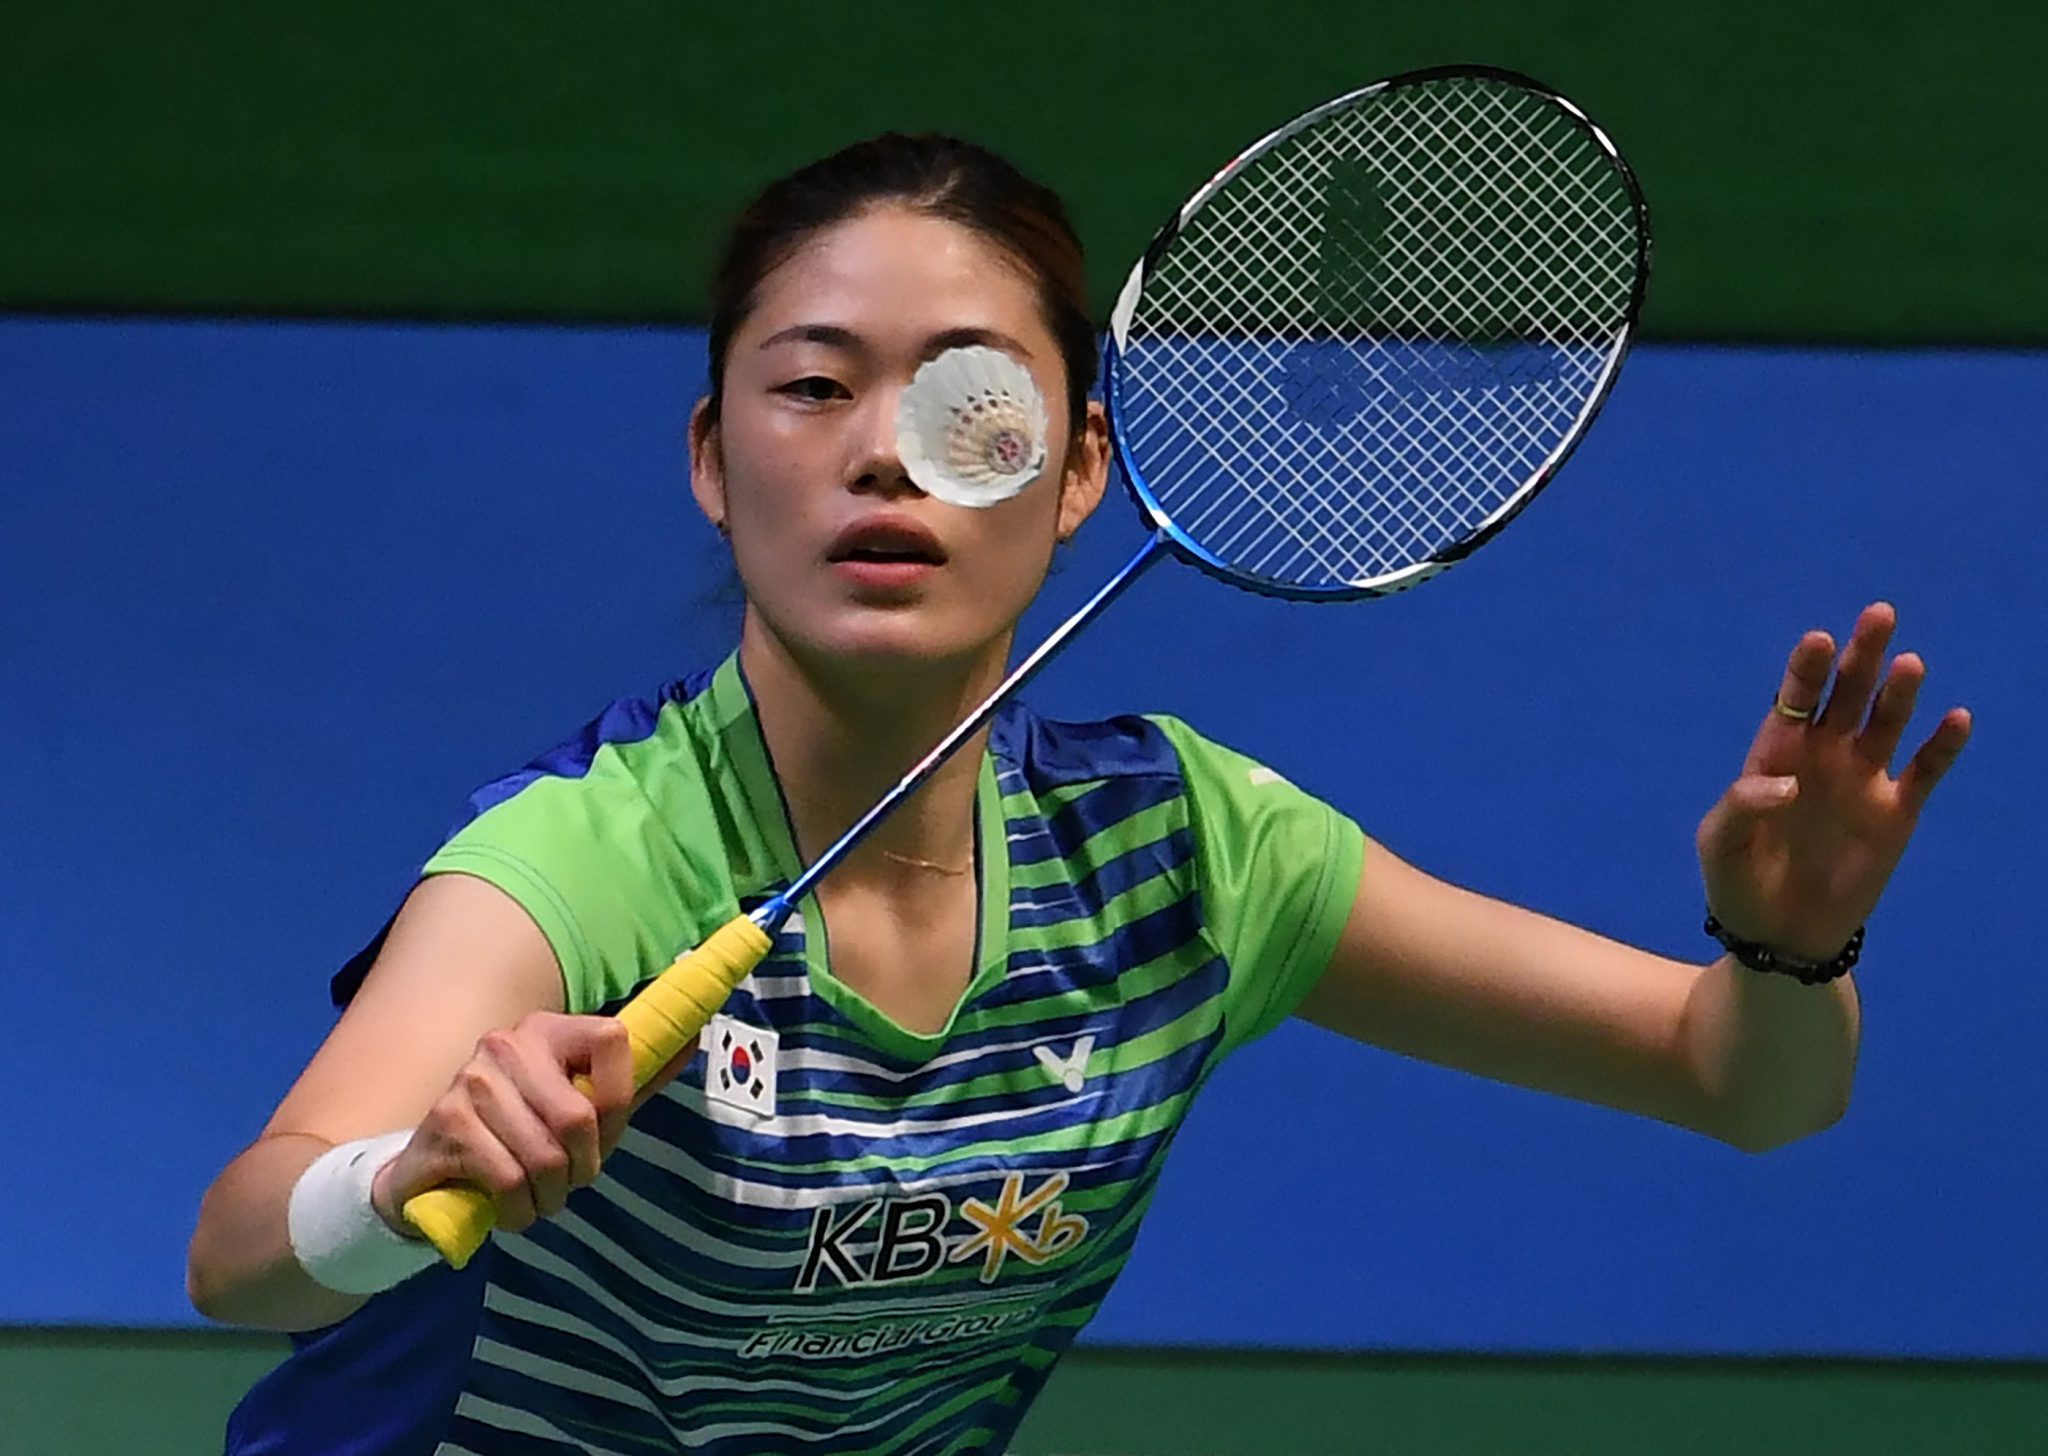 Upsets galore on day two of Yonex Canada Open